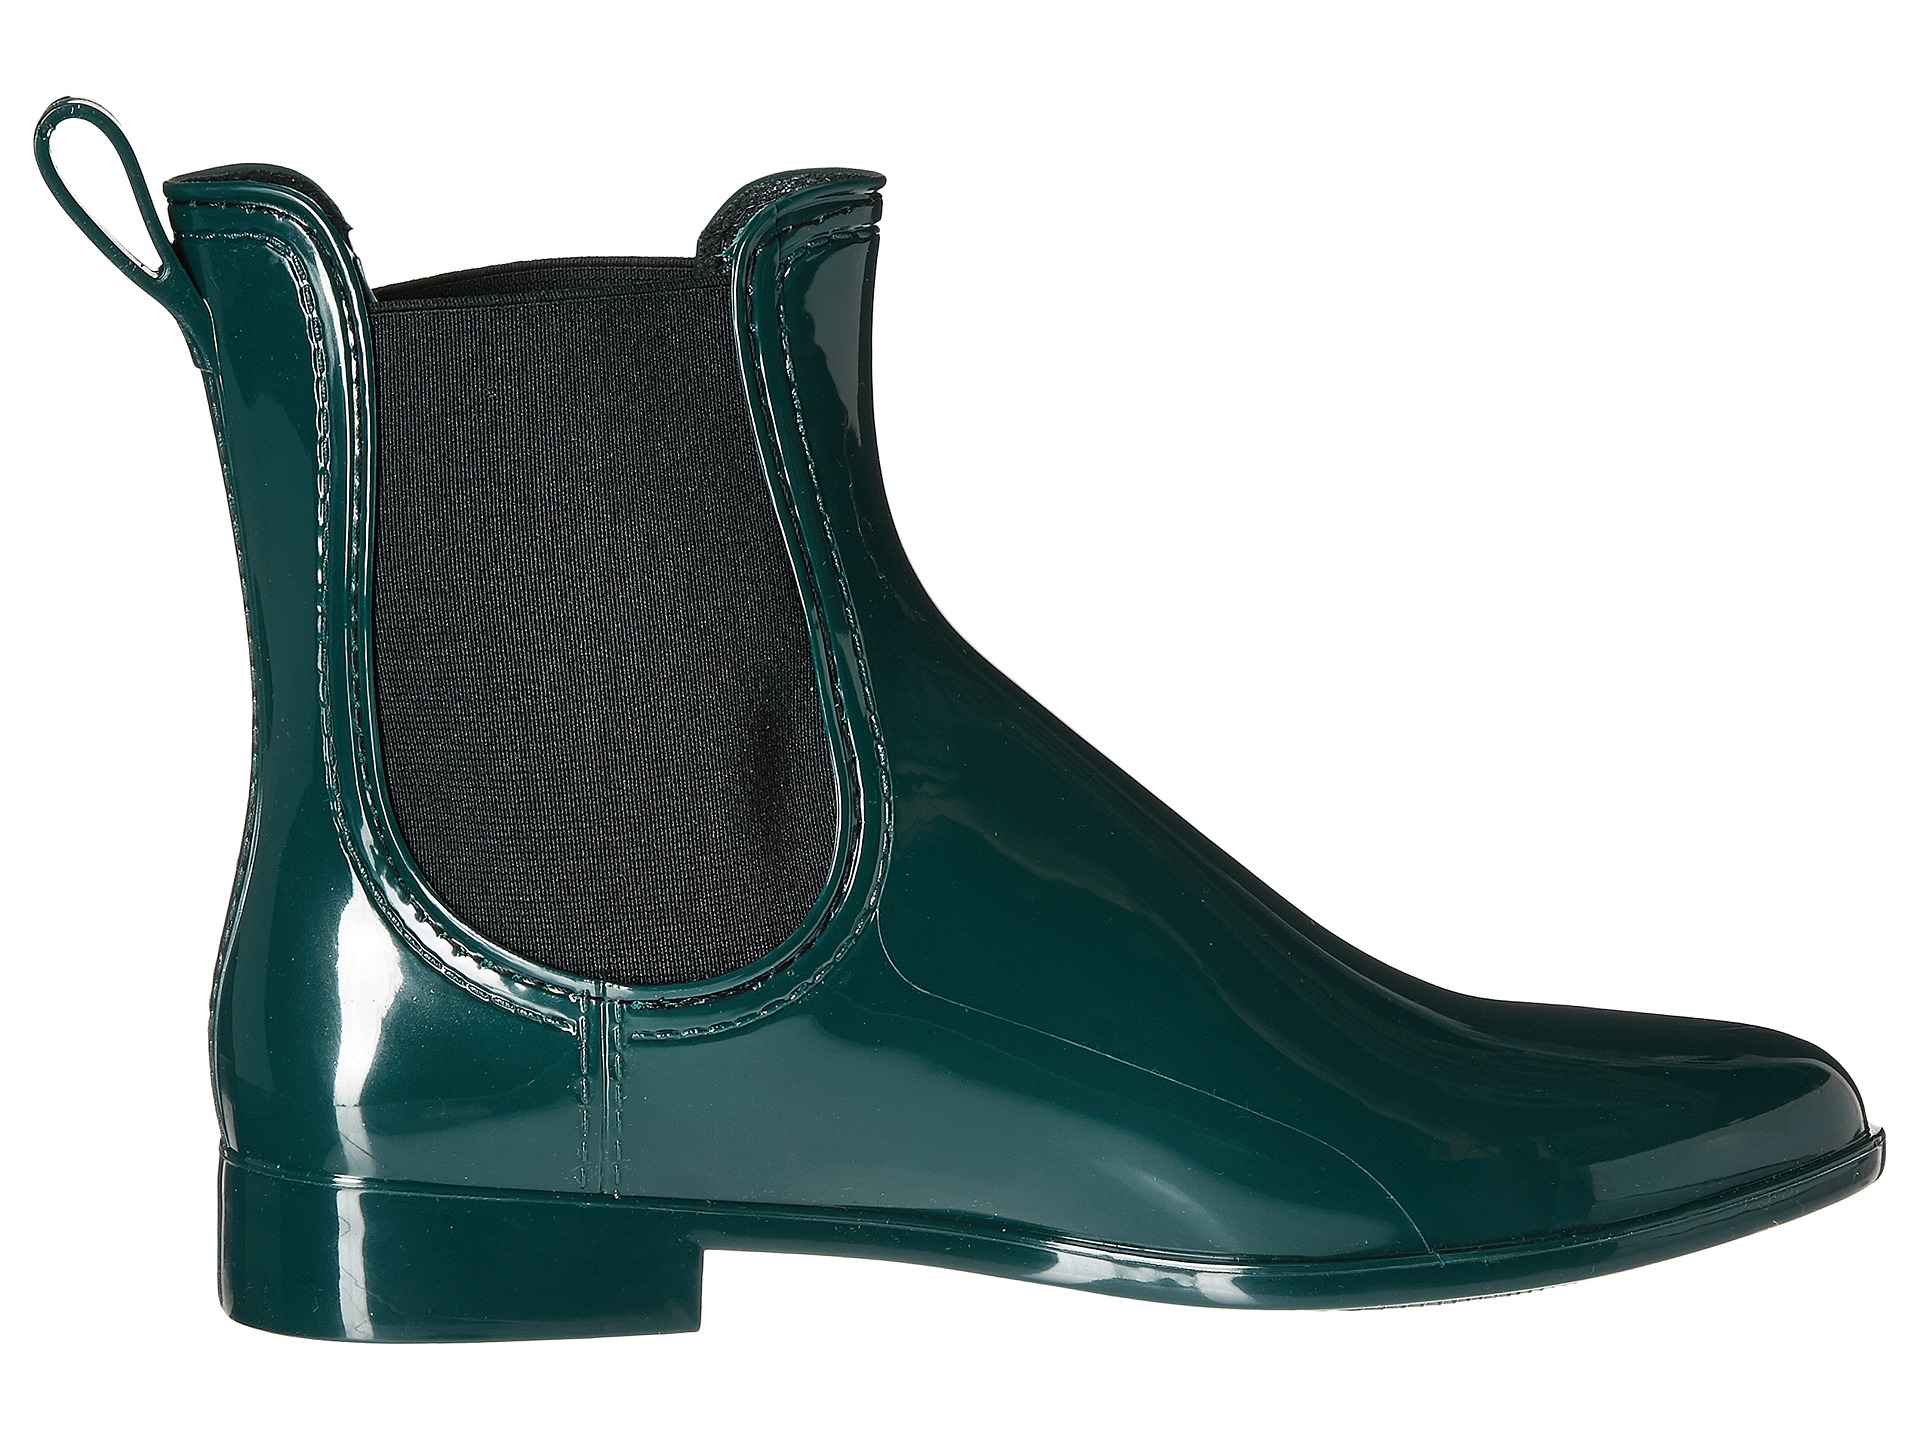 M Missoni Ankle Rain Boots Teal - Zappos.com Free Shipping BOTH Ways